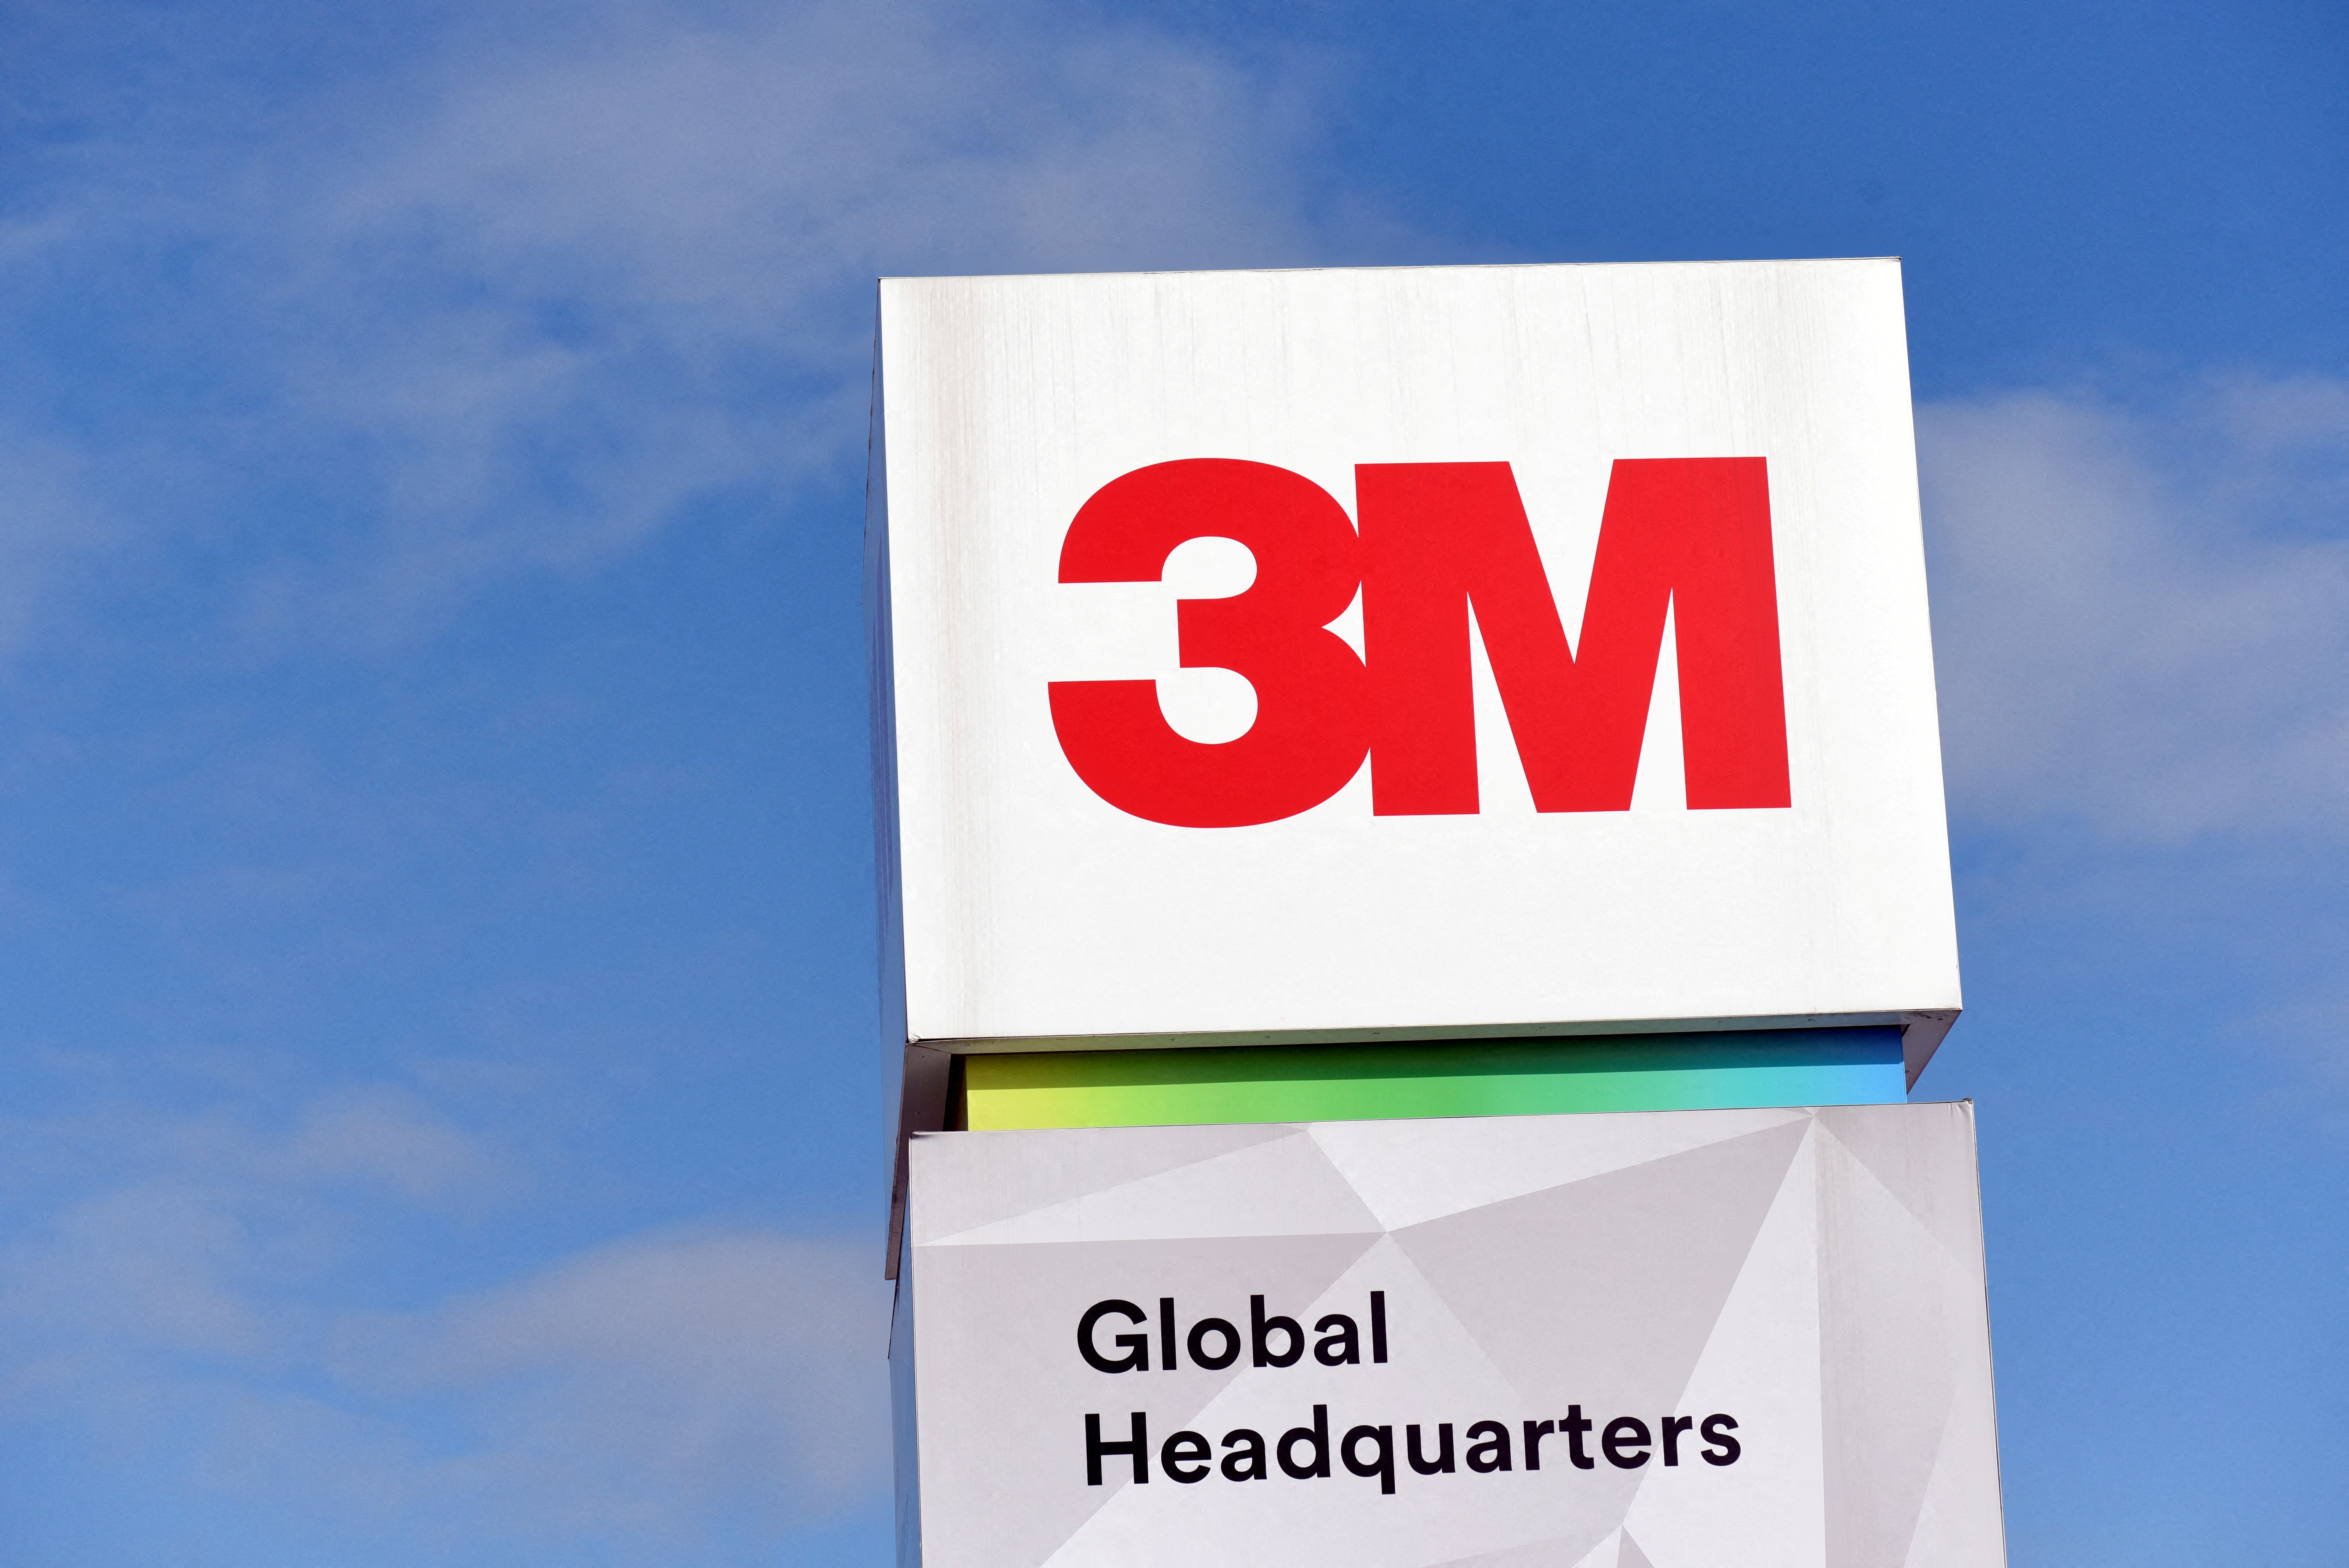 3M's global headquarters are in Maplewood, Minnesota